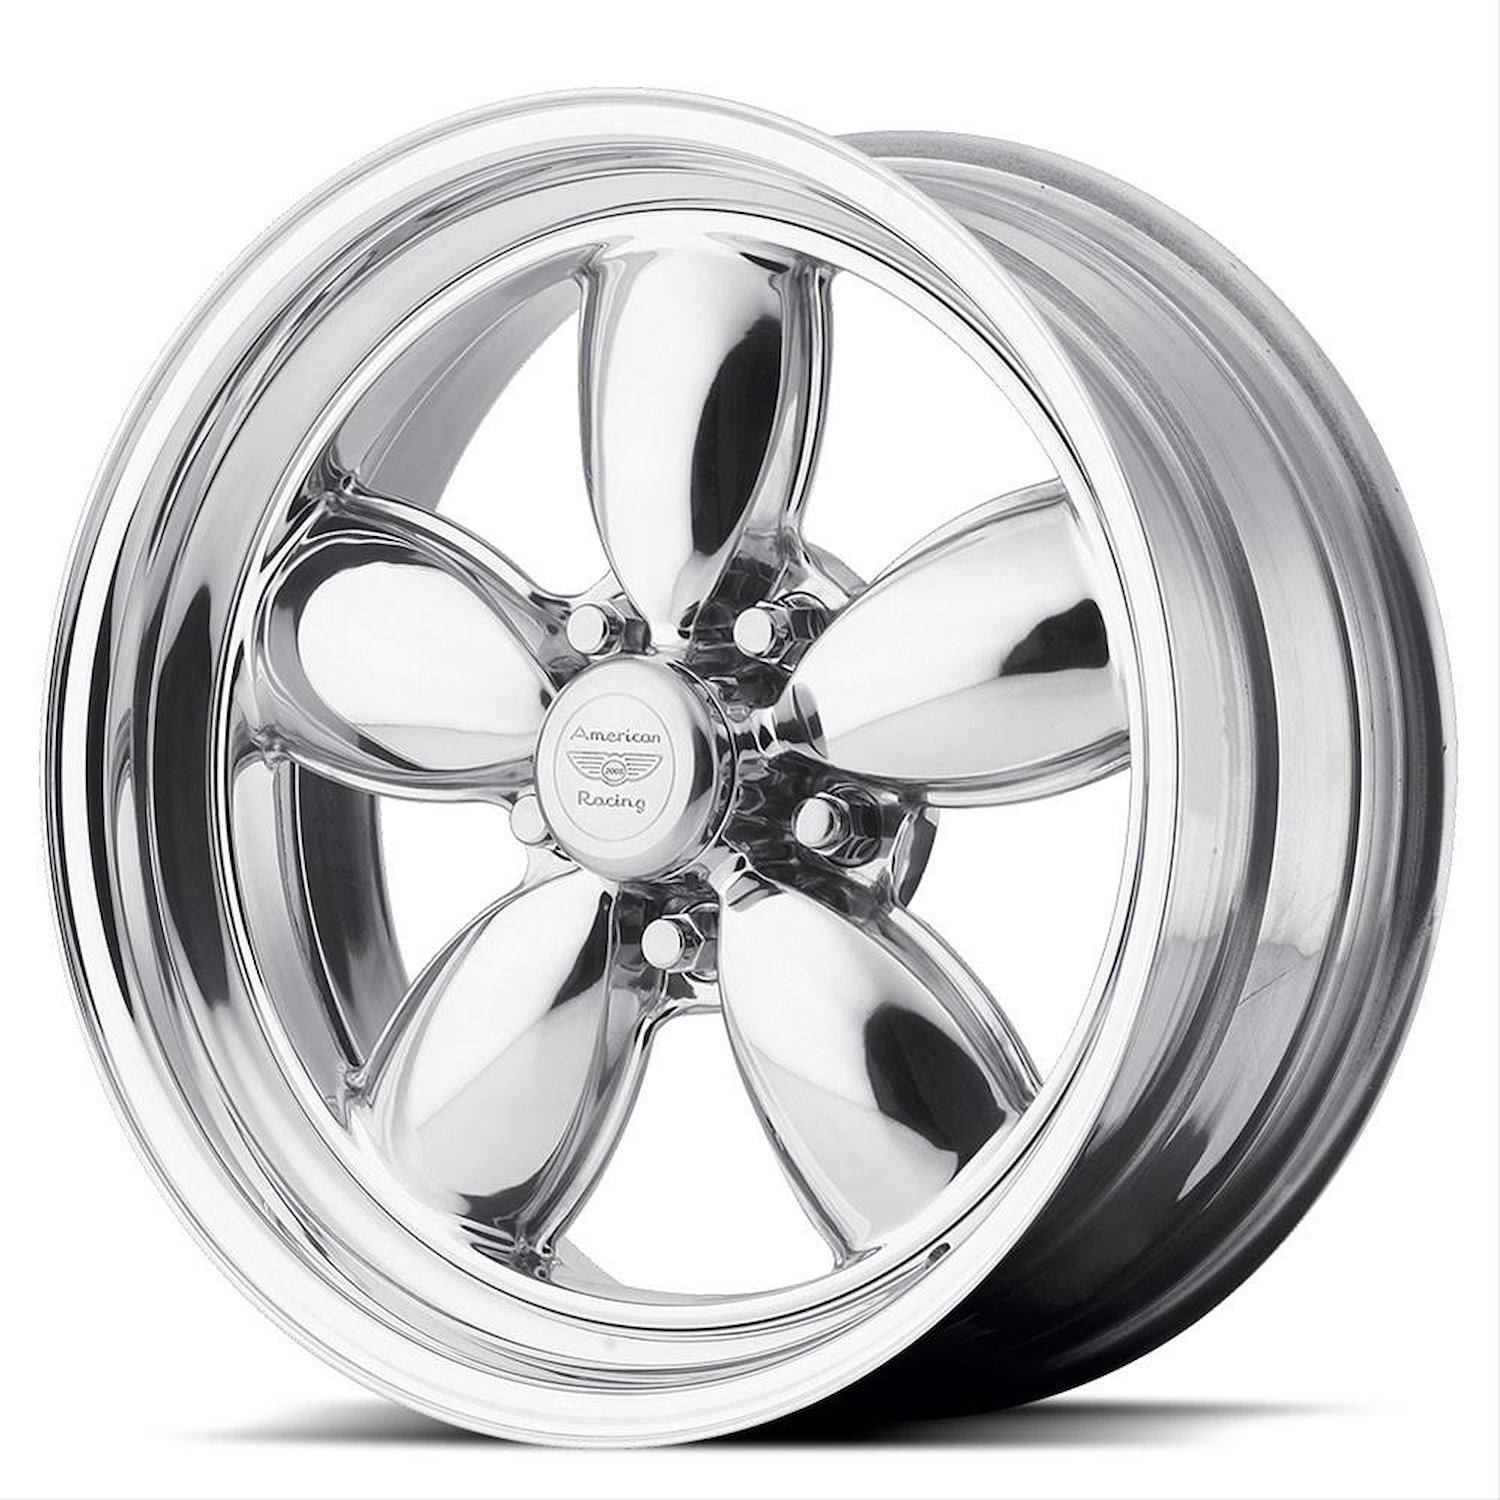 AMERICAN RACING CLASSIC 200S TWO-PIECE POLISHED 15 x 10 5X4.75 -44 3.77